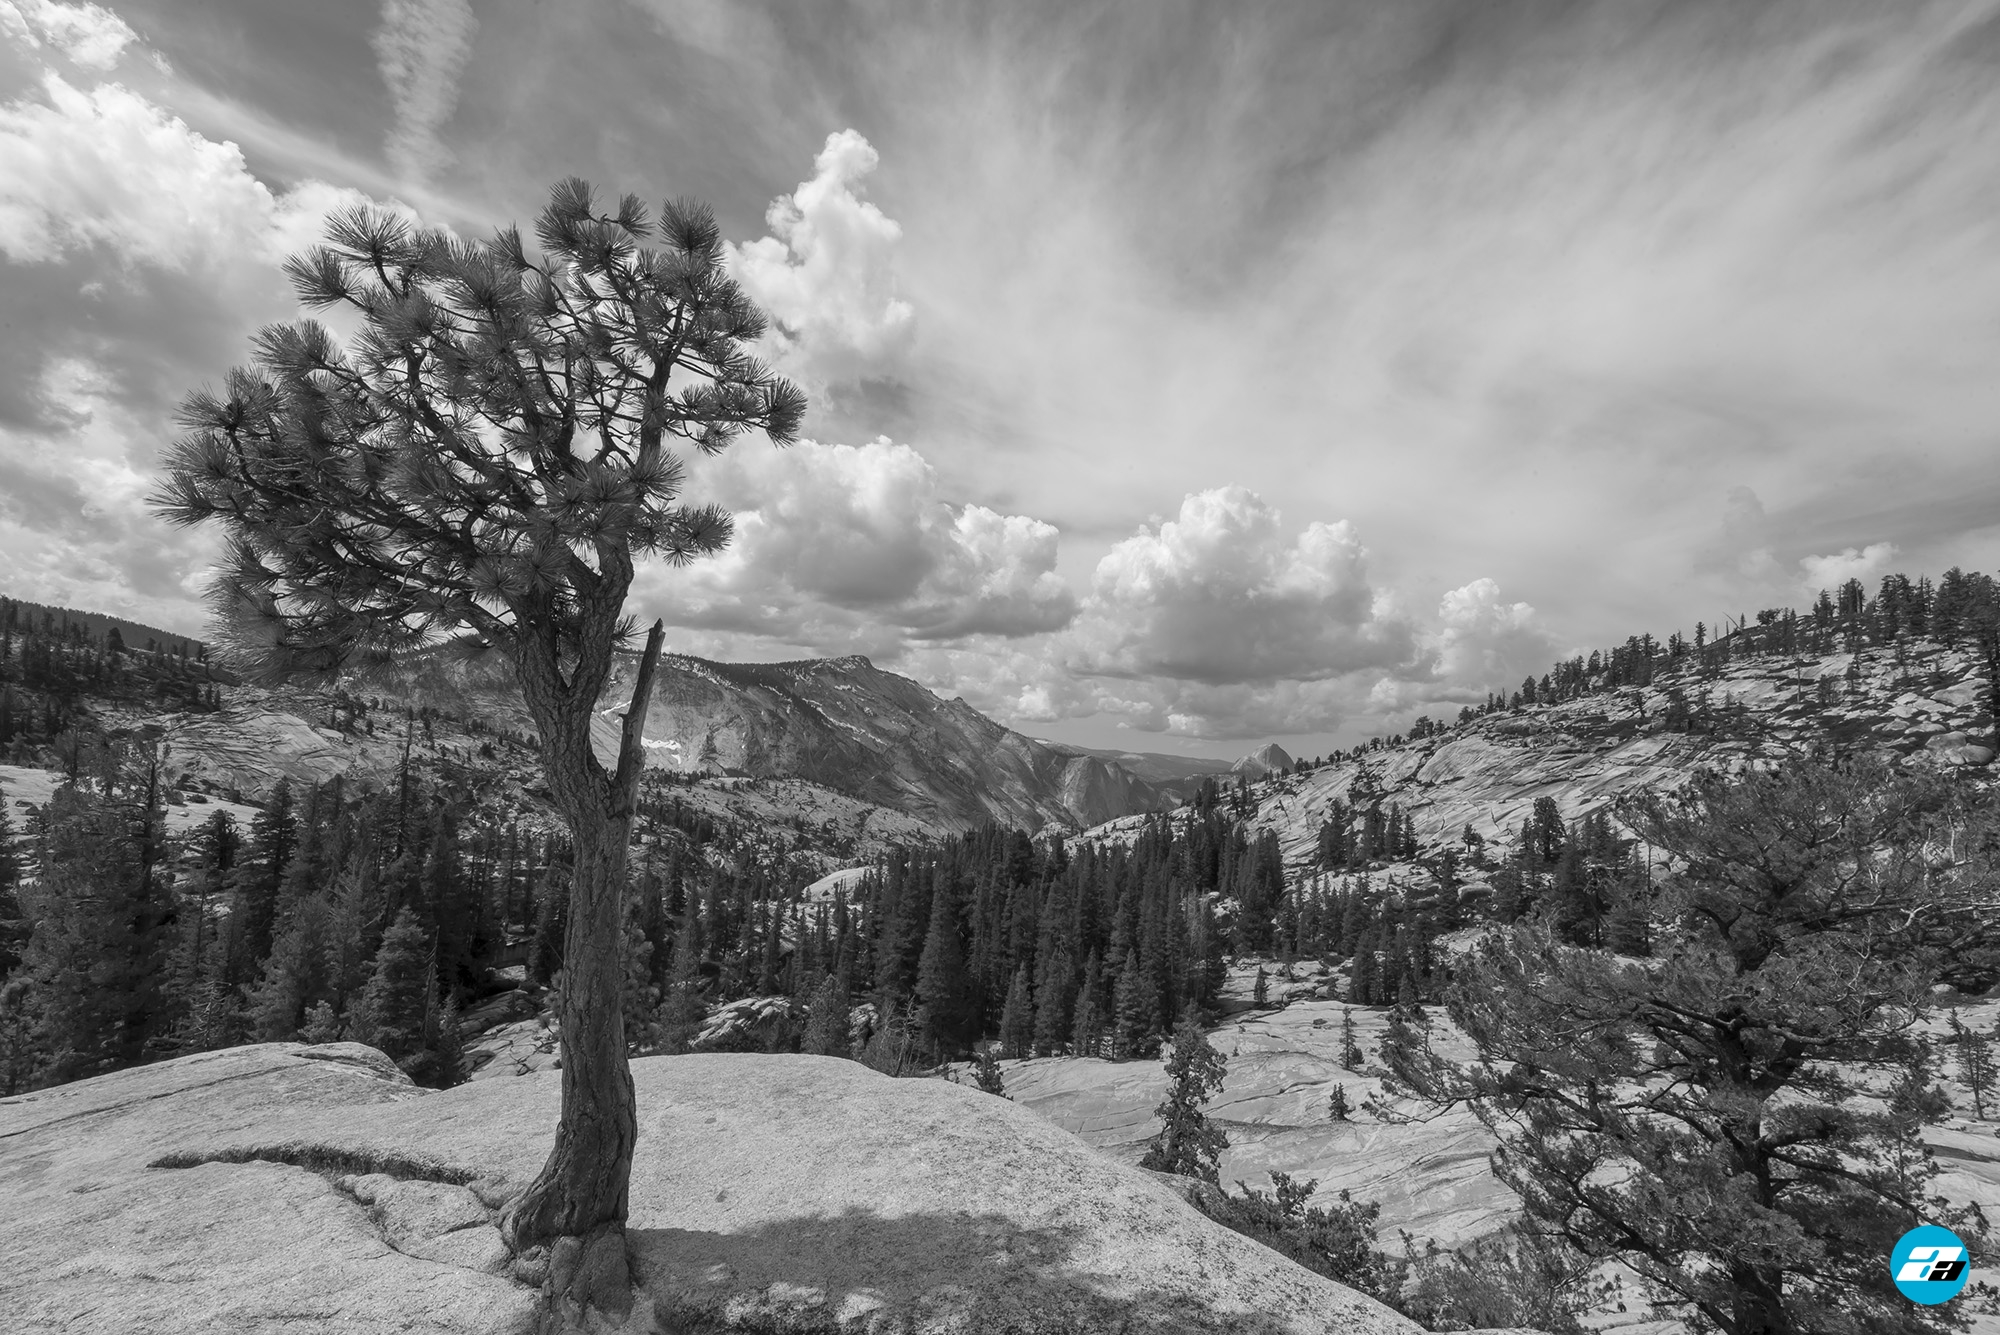 Yosemite National Park, California, USA. Landscape. Solitude. Mountain View. Olmsted Point